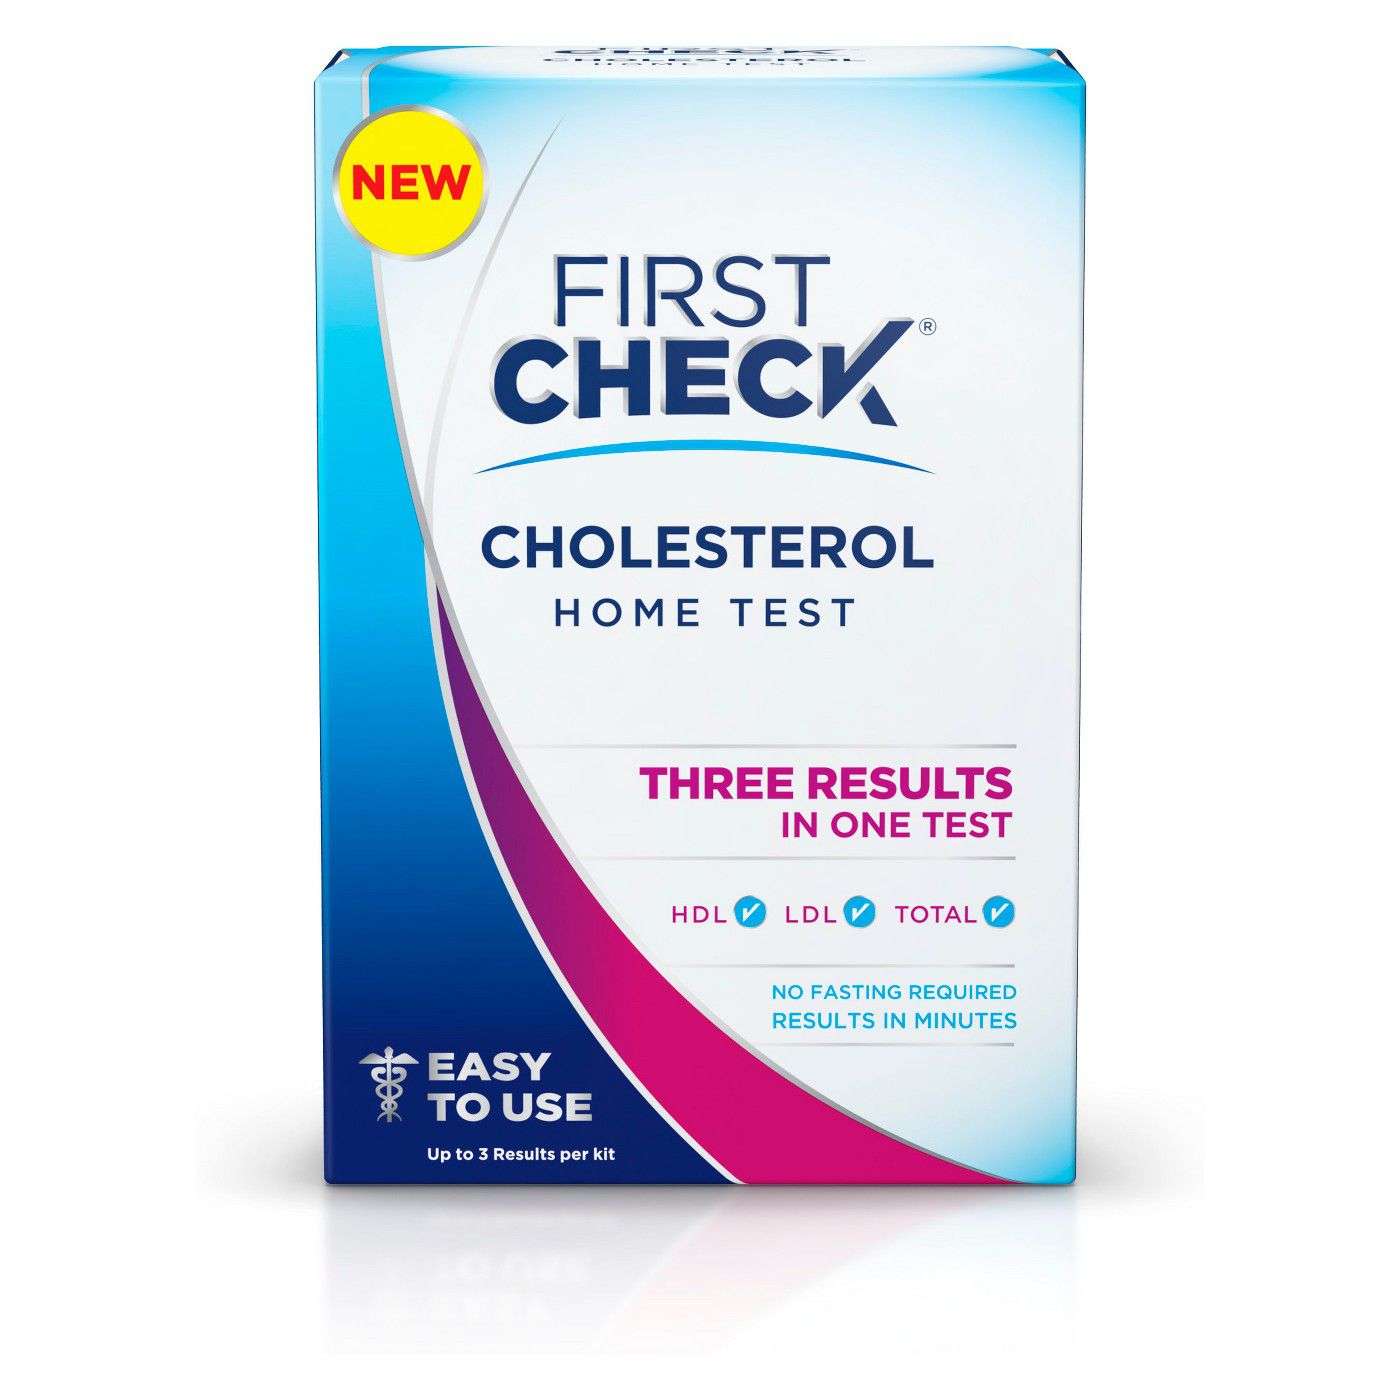 The 5 Best Cholesterol Test Kits of 2019